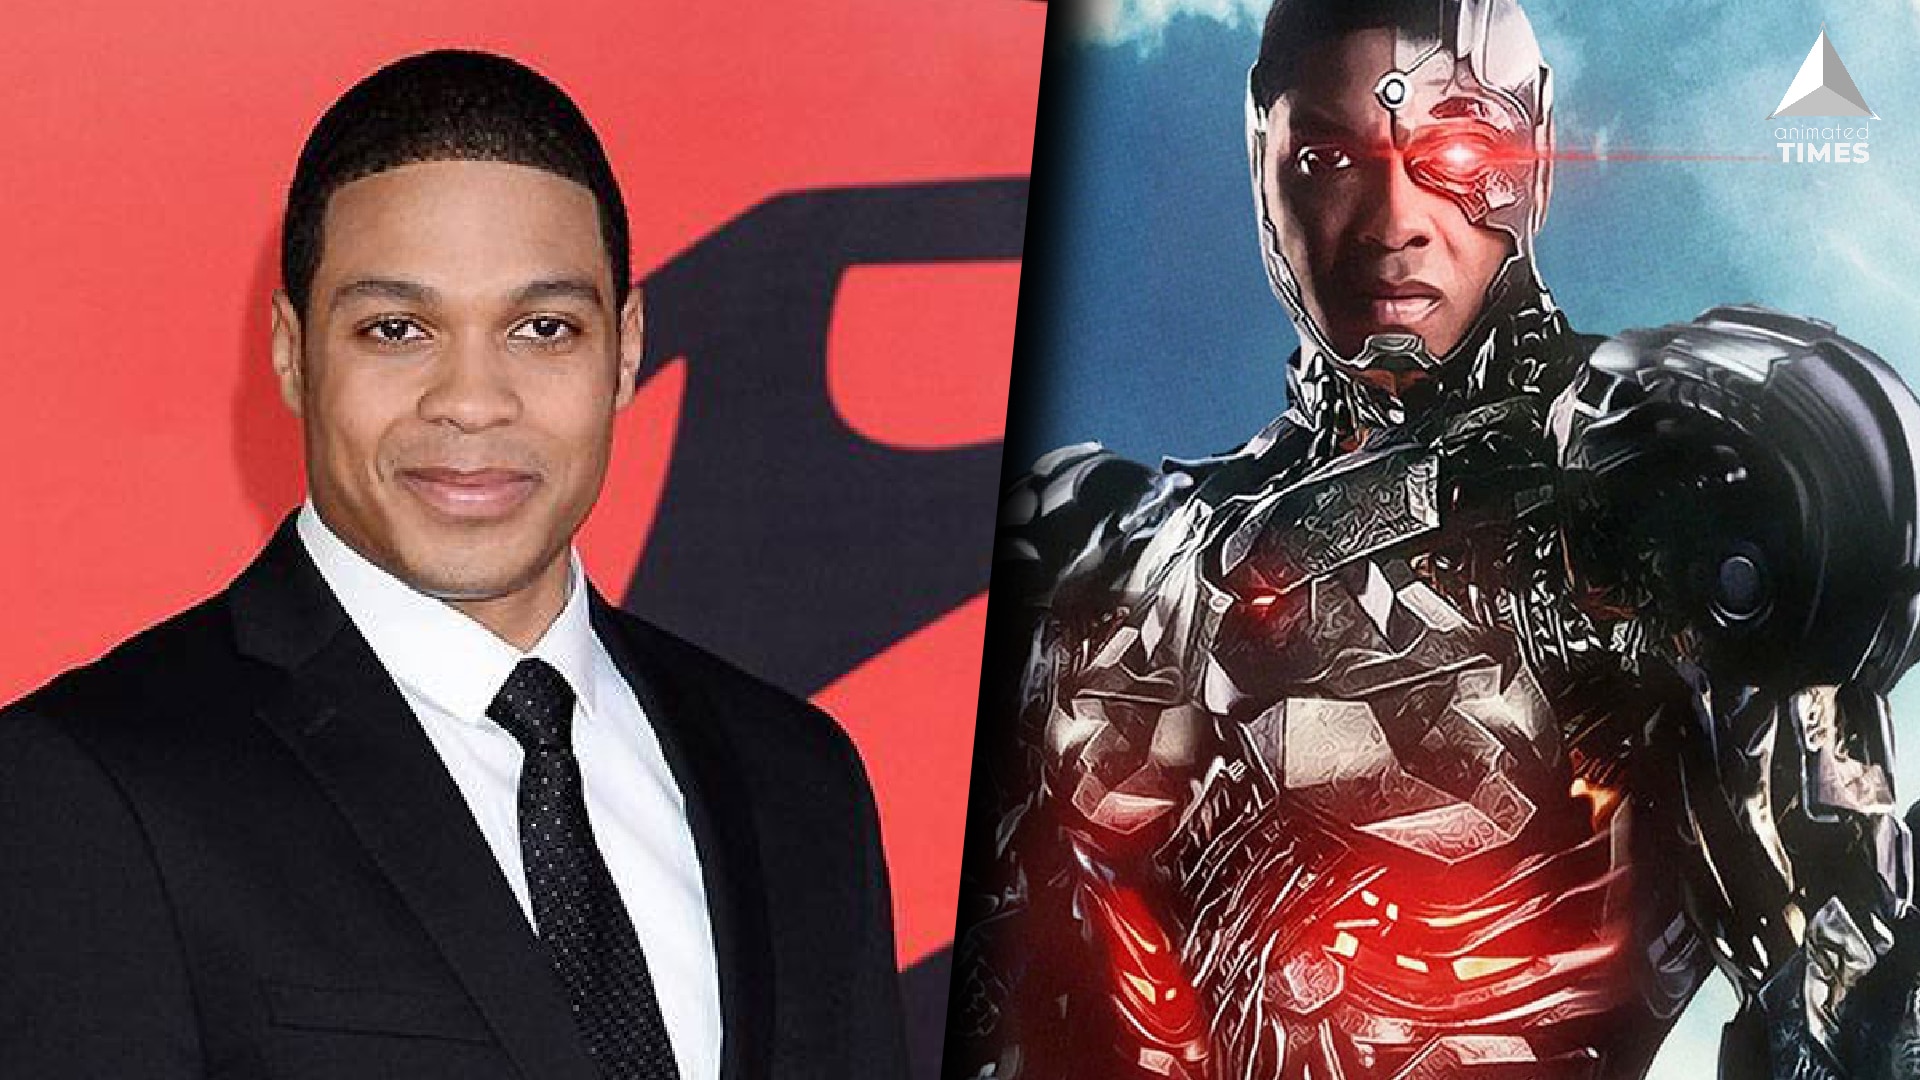 Warner Bros. States Ray Fisher Has Not Cooperated With Investigation About Abuse In Justice League